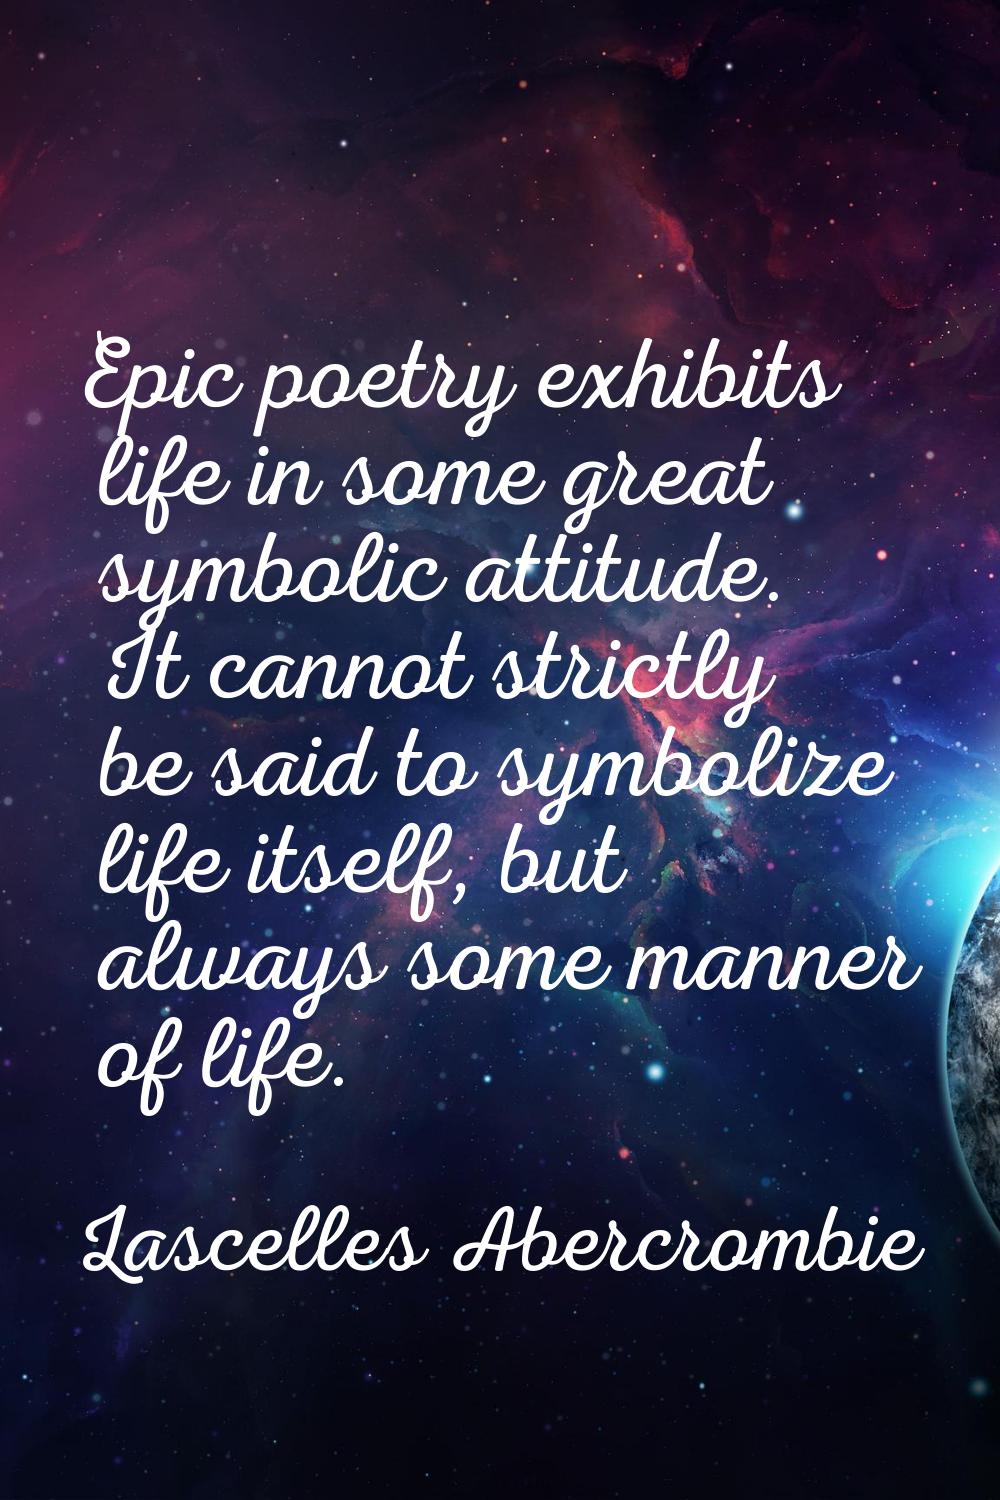 Epic poetry exhibits life in some great symbolic attitude. It cannot strictly be said to symbolize 